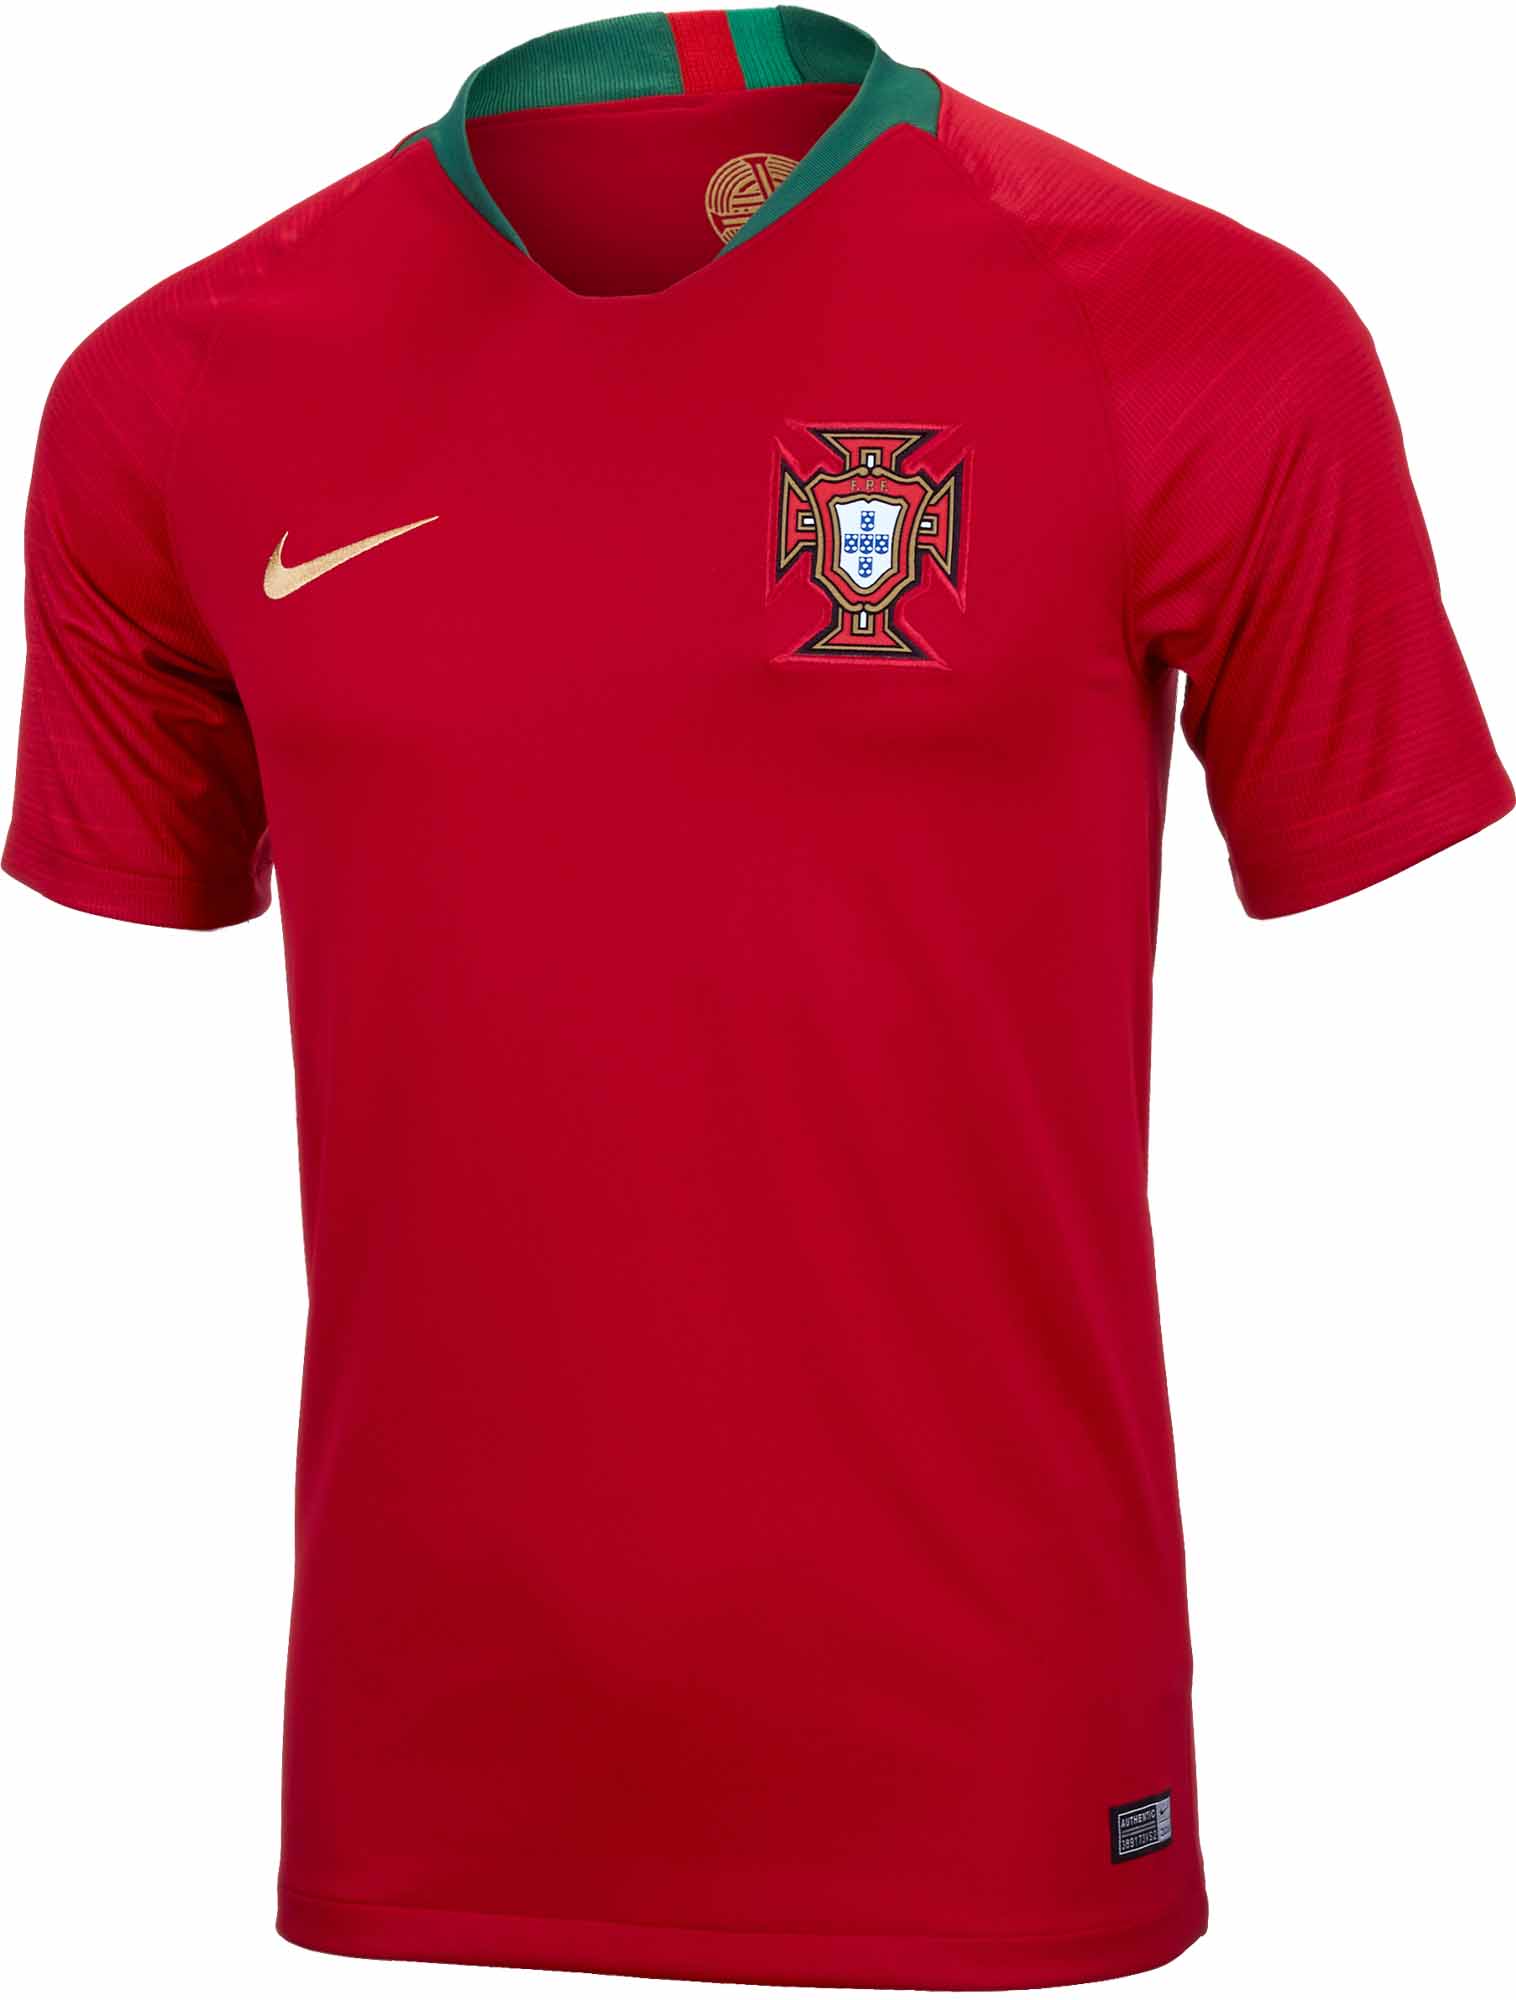 Nike Portugal Home Jersey 2018-19 